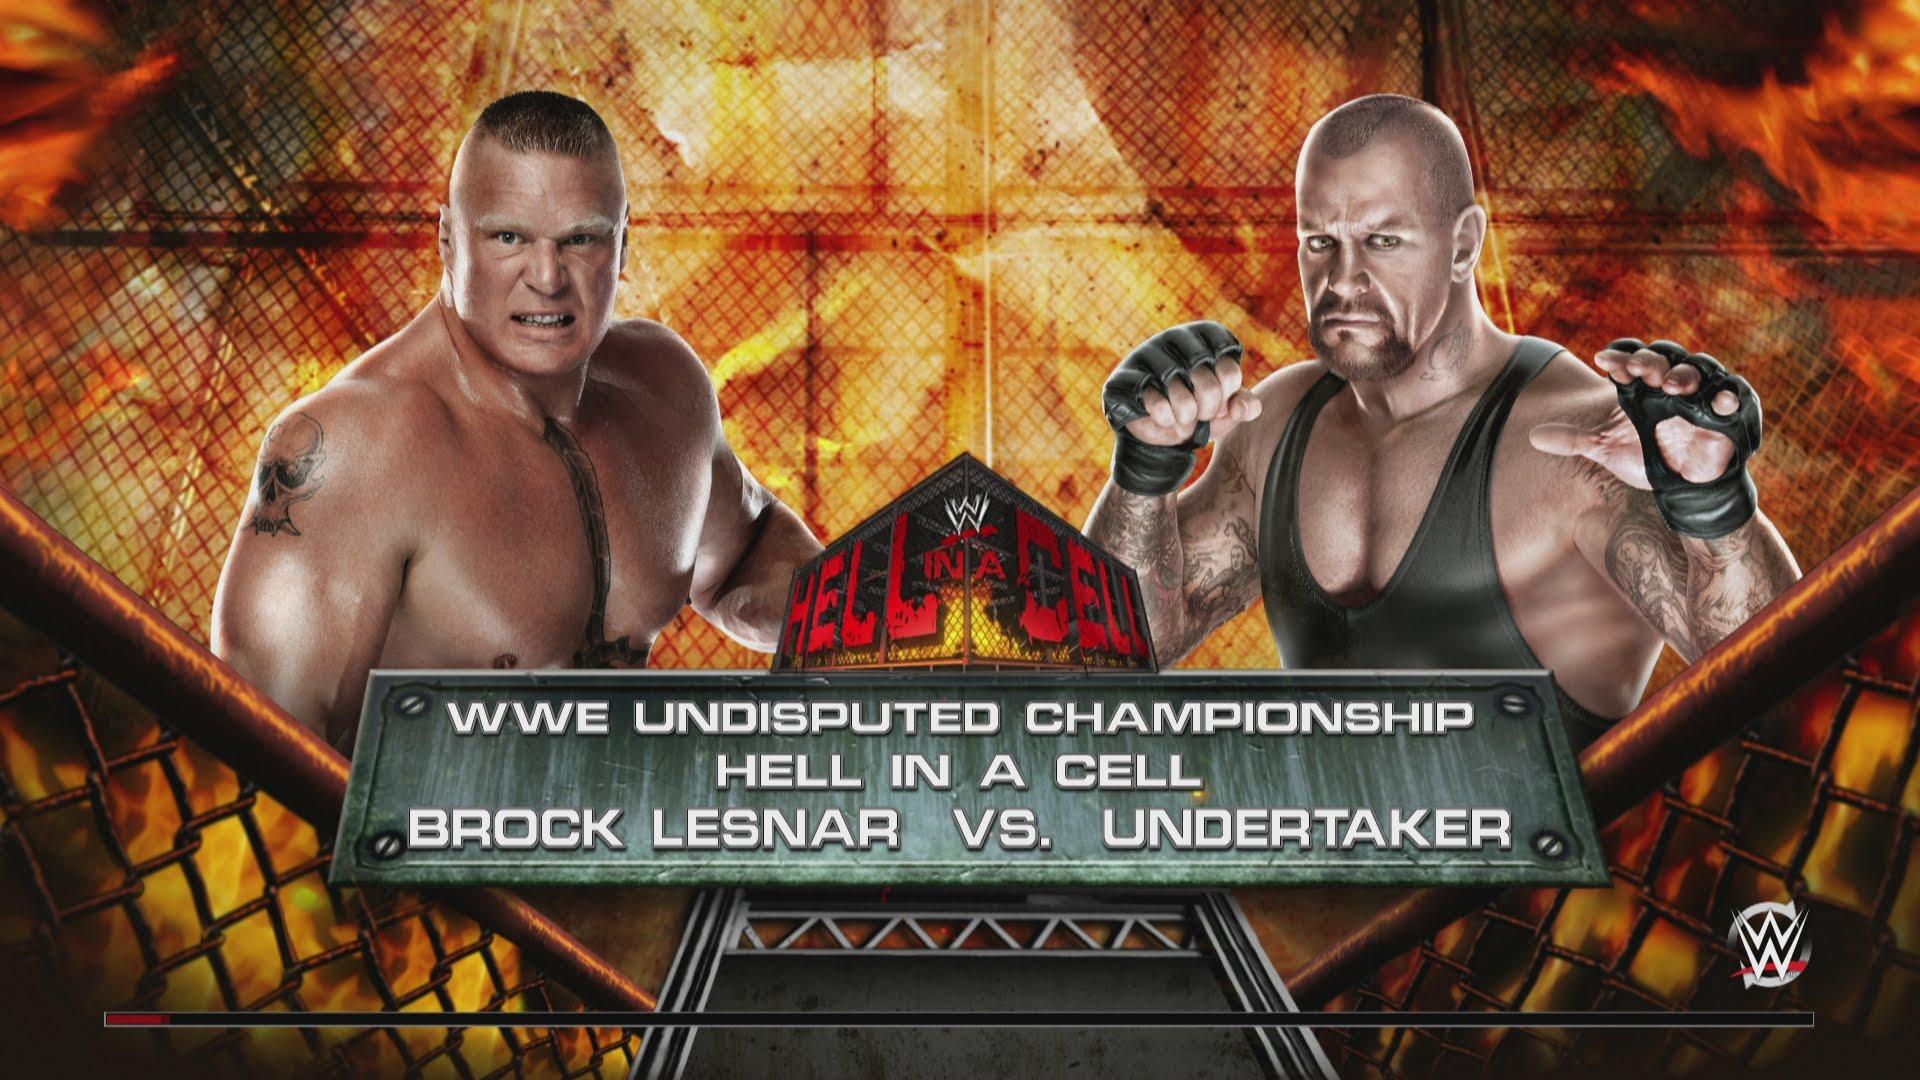 WWE 2K15 Lesnar vs. Undertaker Hell in a Cell Undisputed